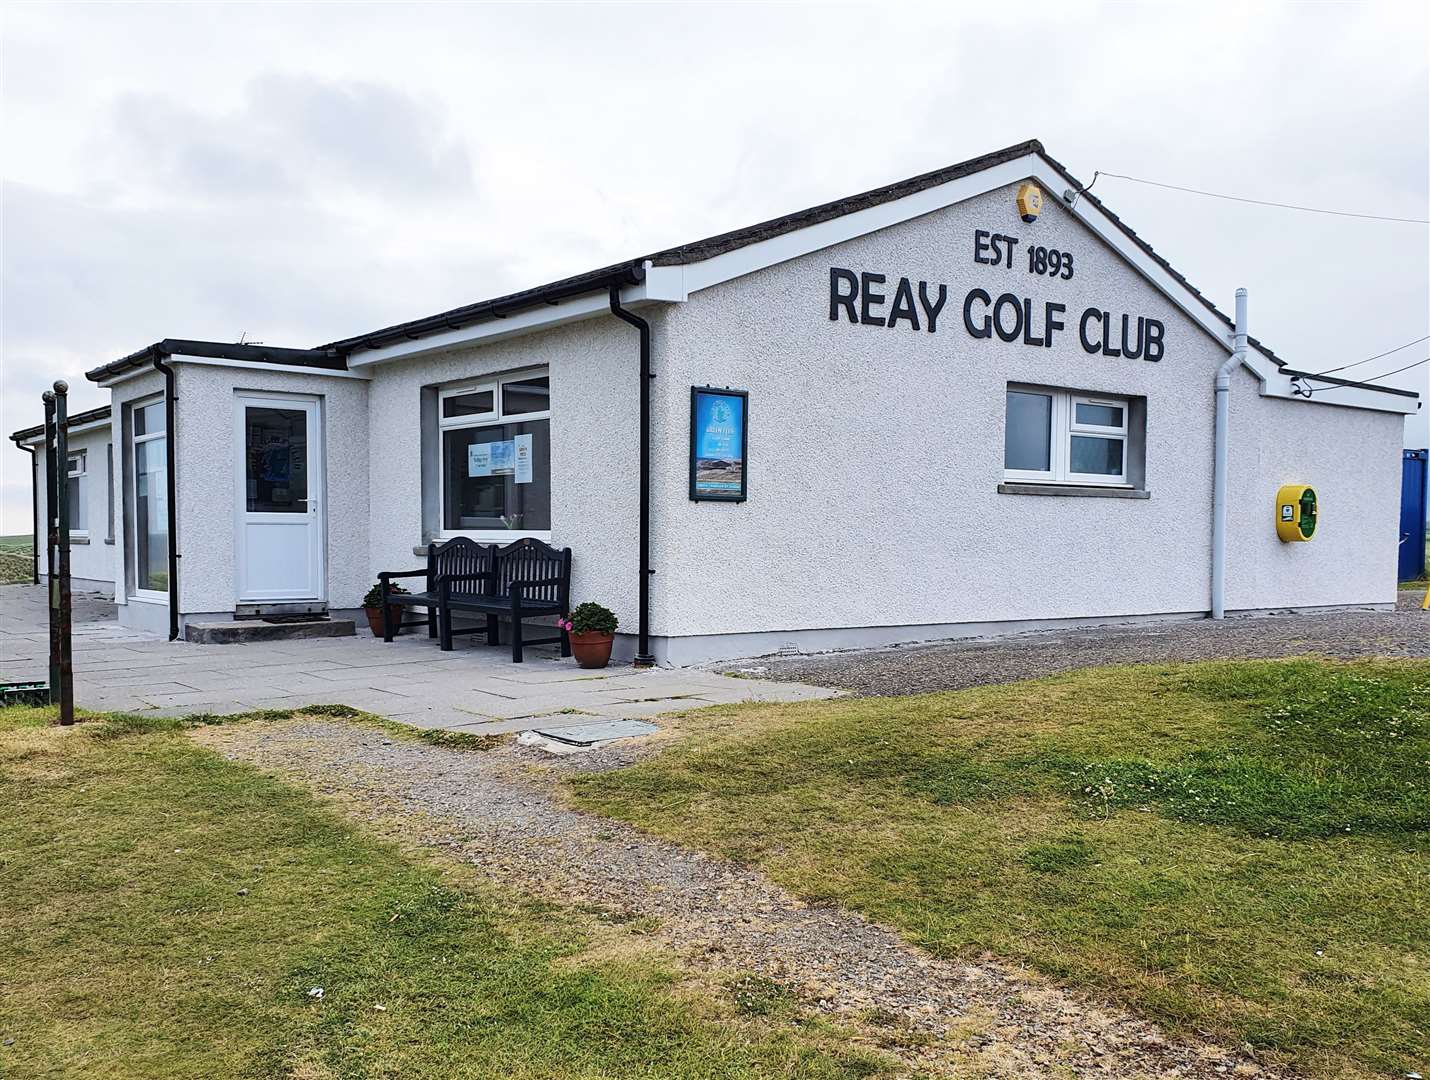 The latest project at Reay has brought improvements to the clubhouse building.